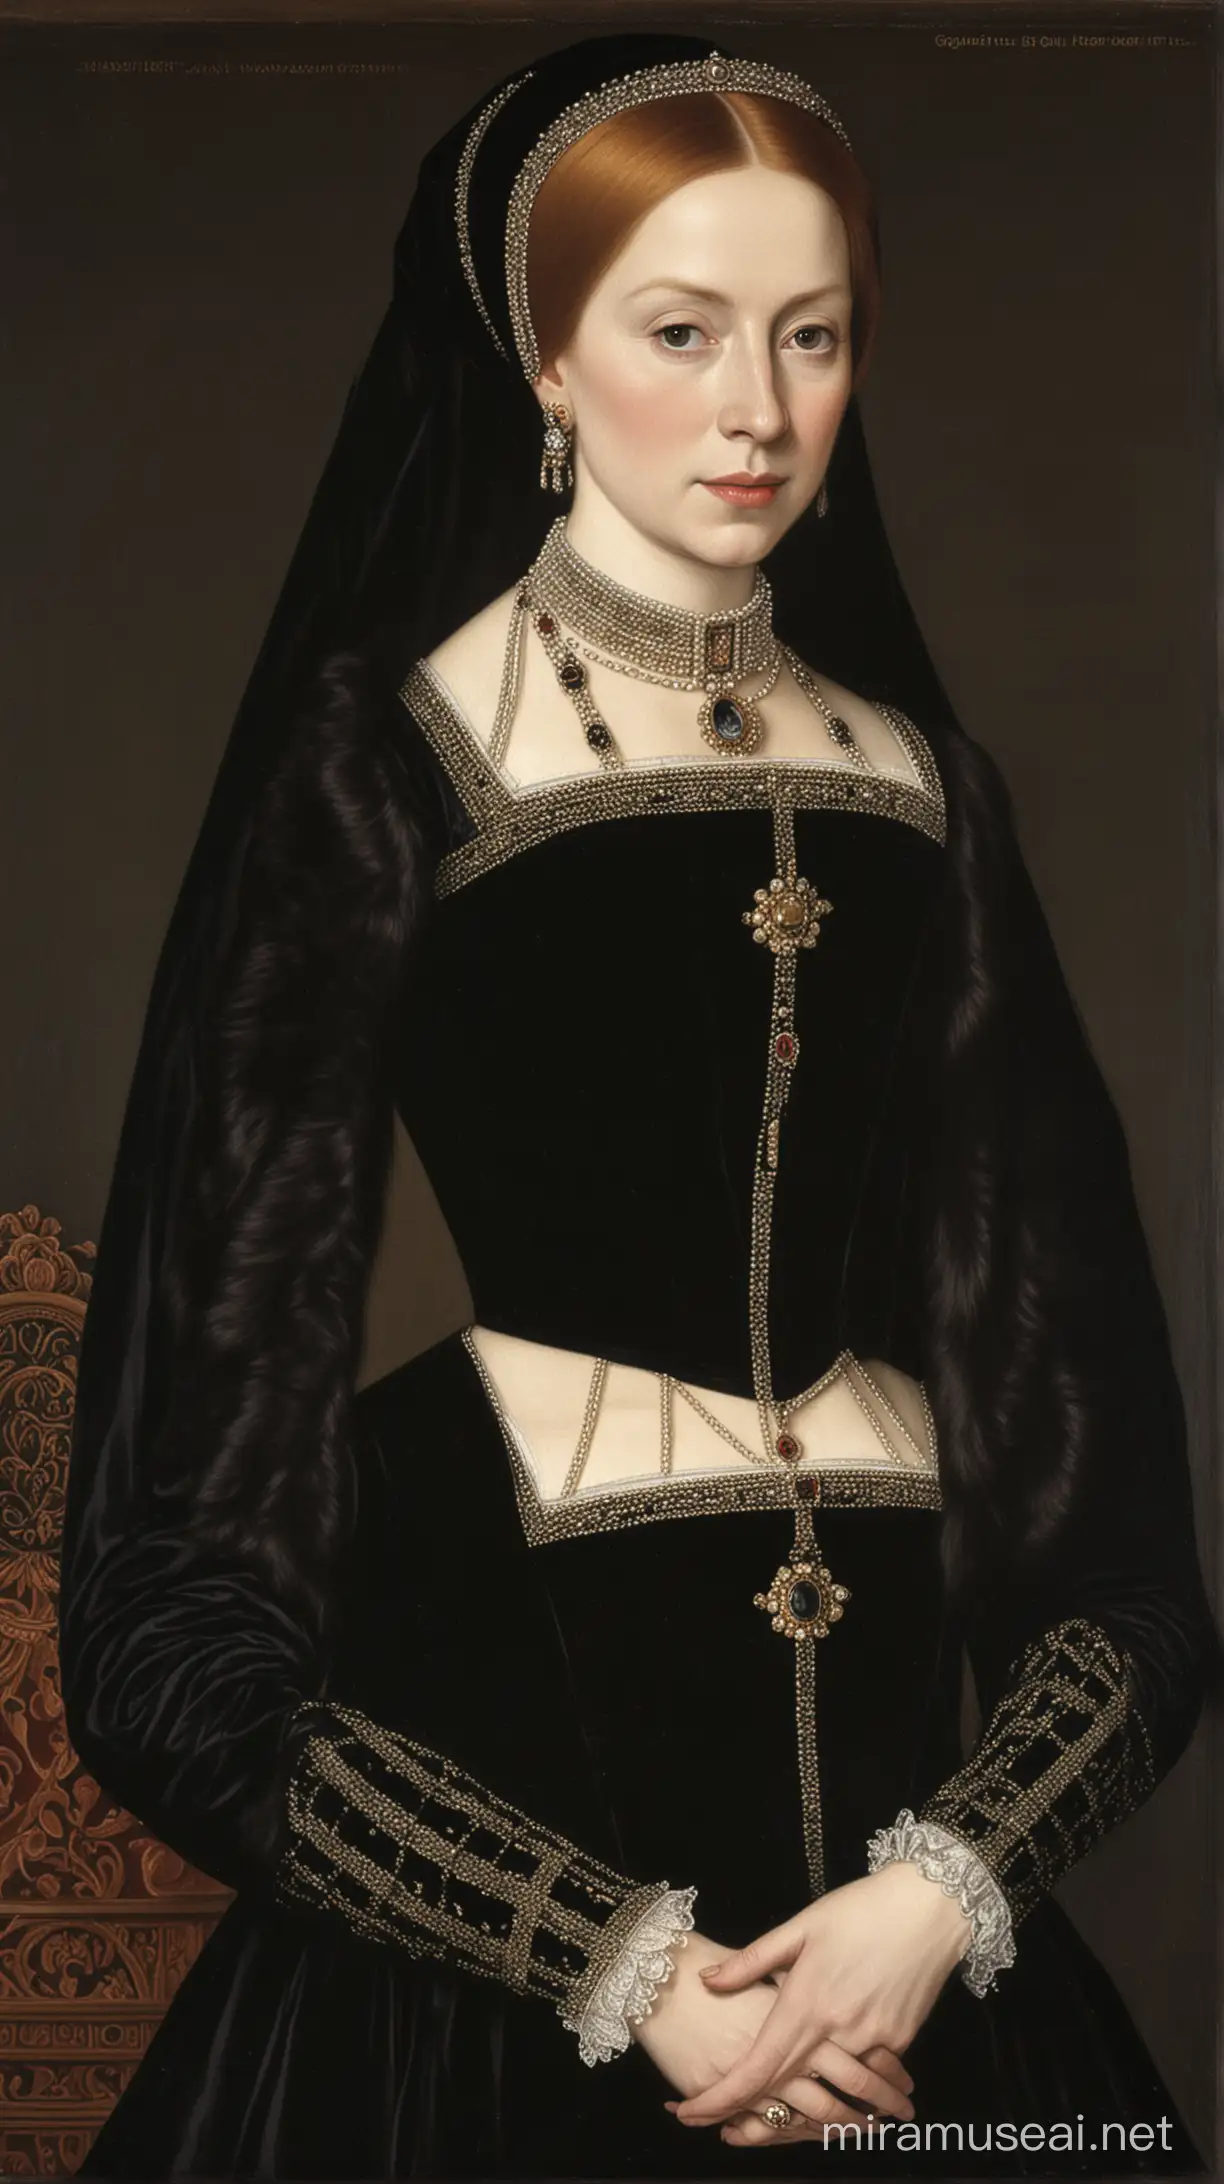 Portrait of queen mary tudor in her black outfit